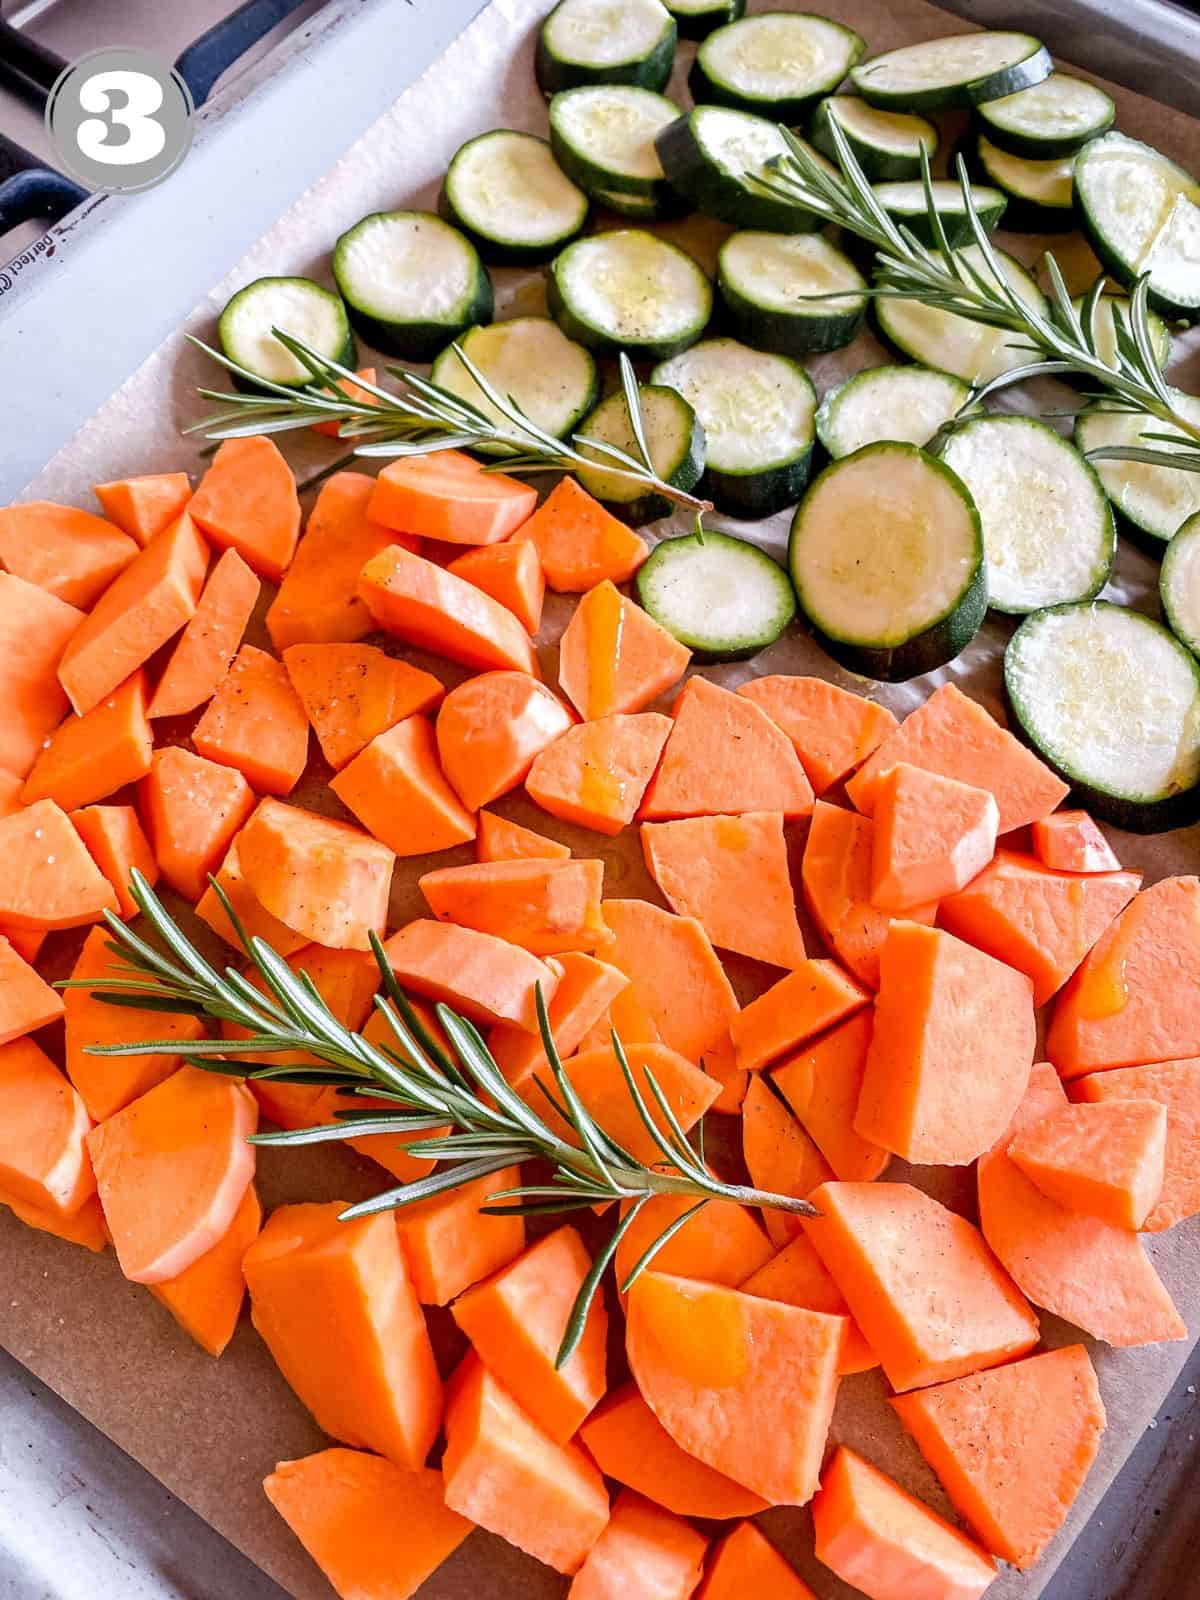 diced sweet potato, zucchini and rosemary on a lined baking tray.